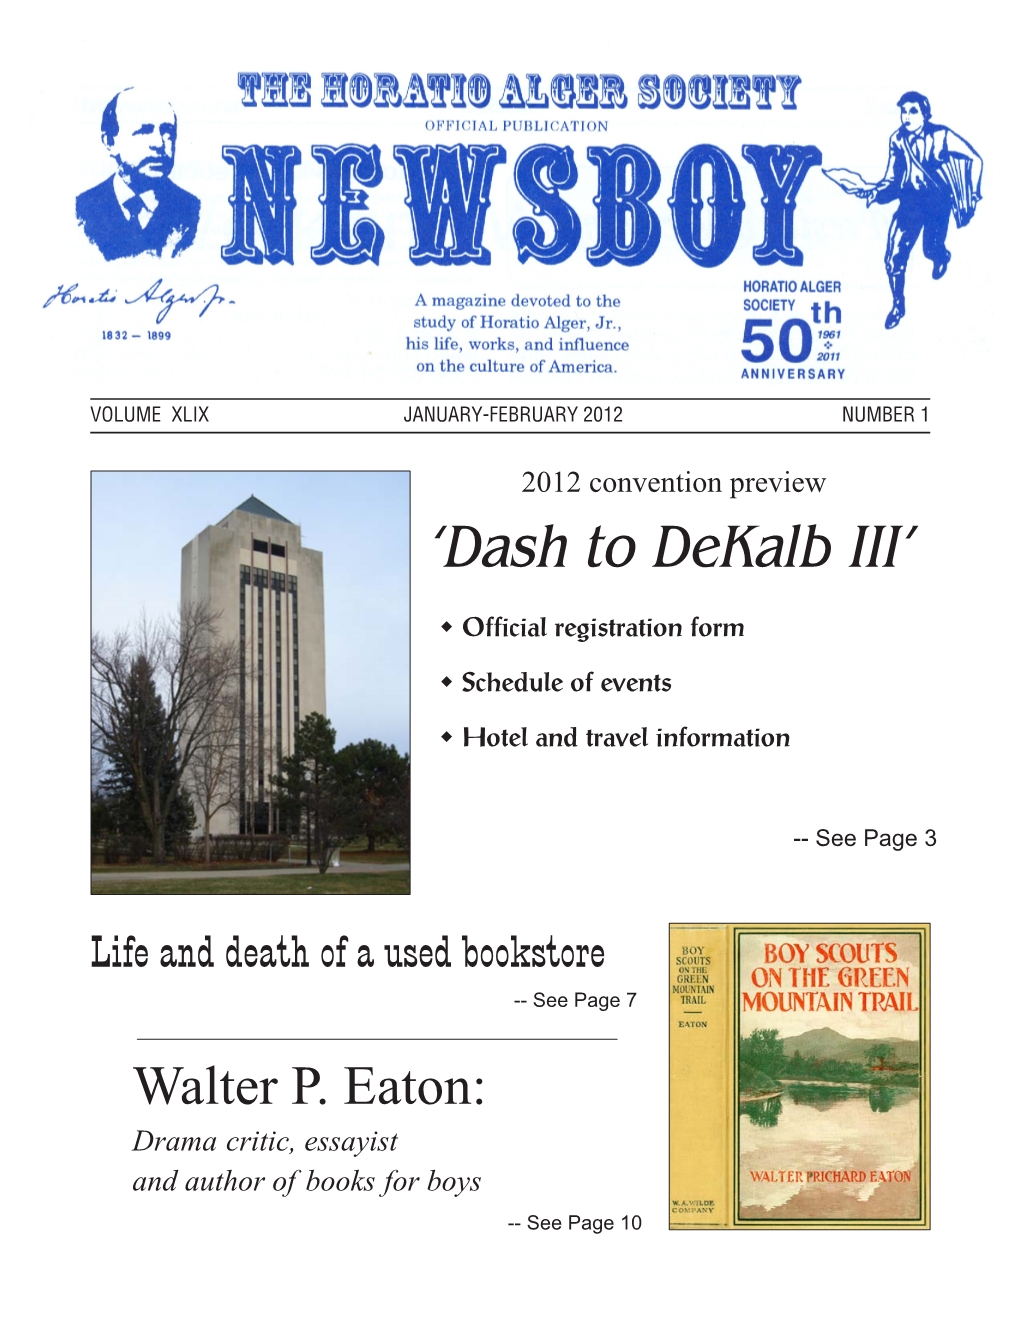 Walter P. Eaton: Drama Critic, Essayist and Author of Books for Boys -- See Page 10 Page 2 NEWSBOY January-February 2012